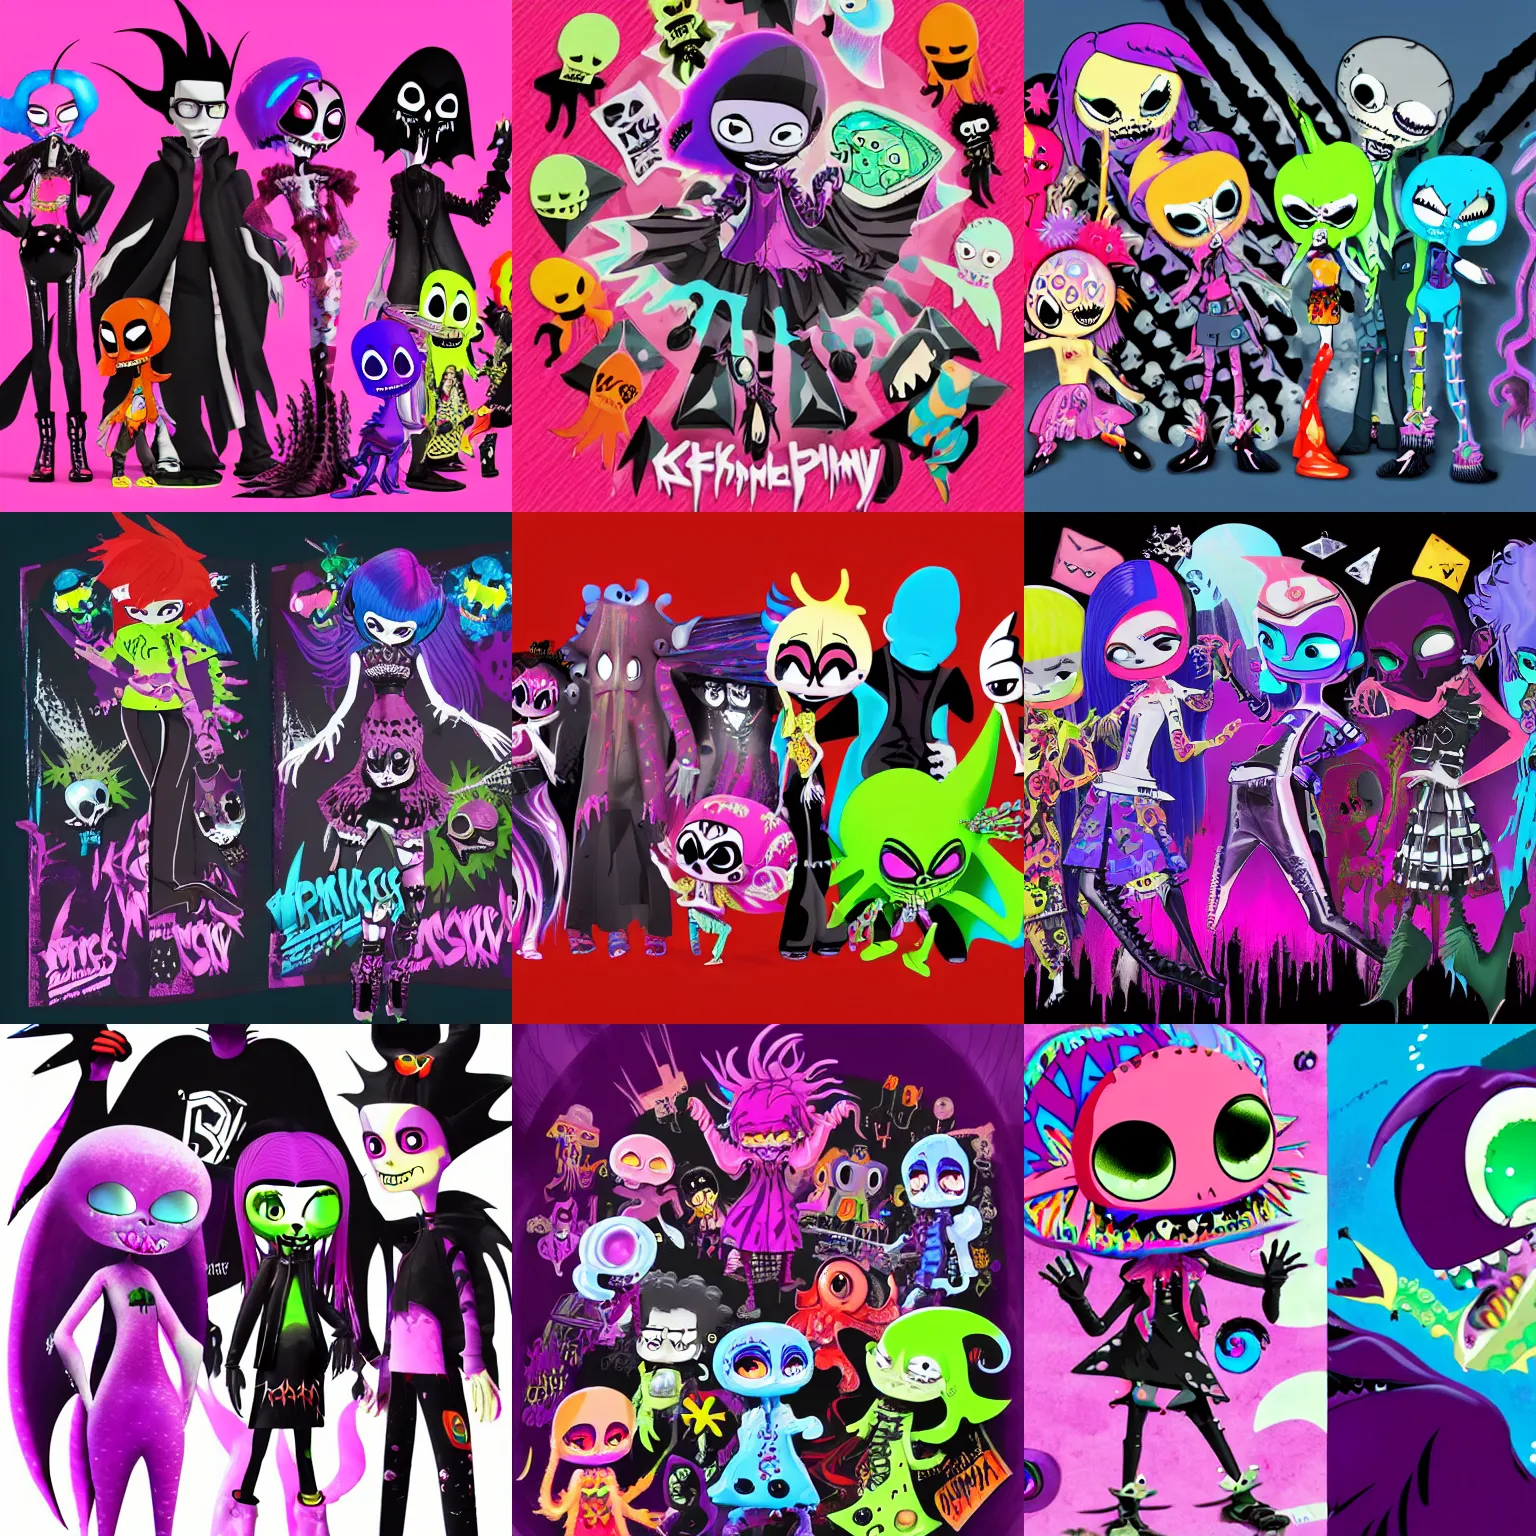 Prompt: lisa frank gothic emo punk vampiric rockstar vampire squid with translucent skin concept character designs of various shapes and sizes by genndy tartakovsky and the creators of fret nice at pieces interactive and splatoon by nintendo for the new hotel transylvania film starring a vampire squid kraken monster